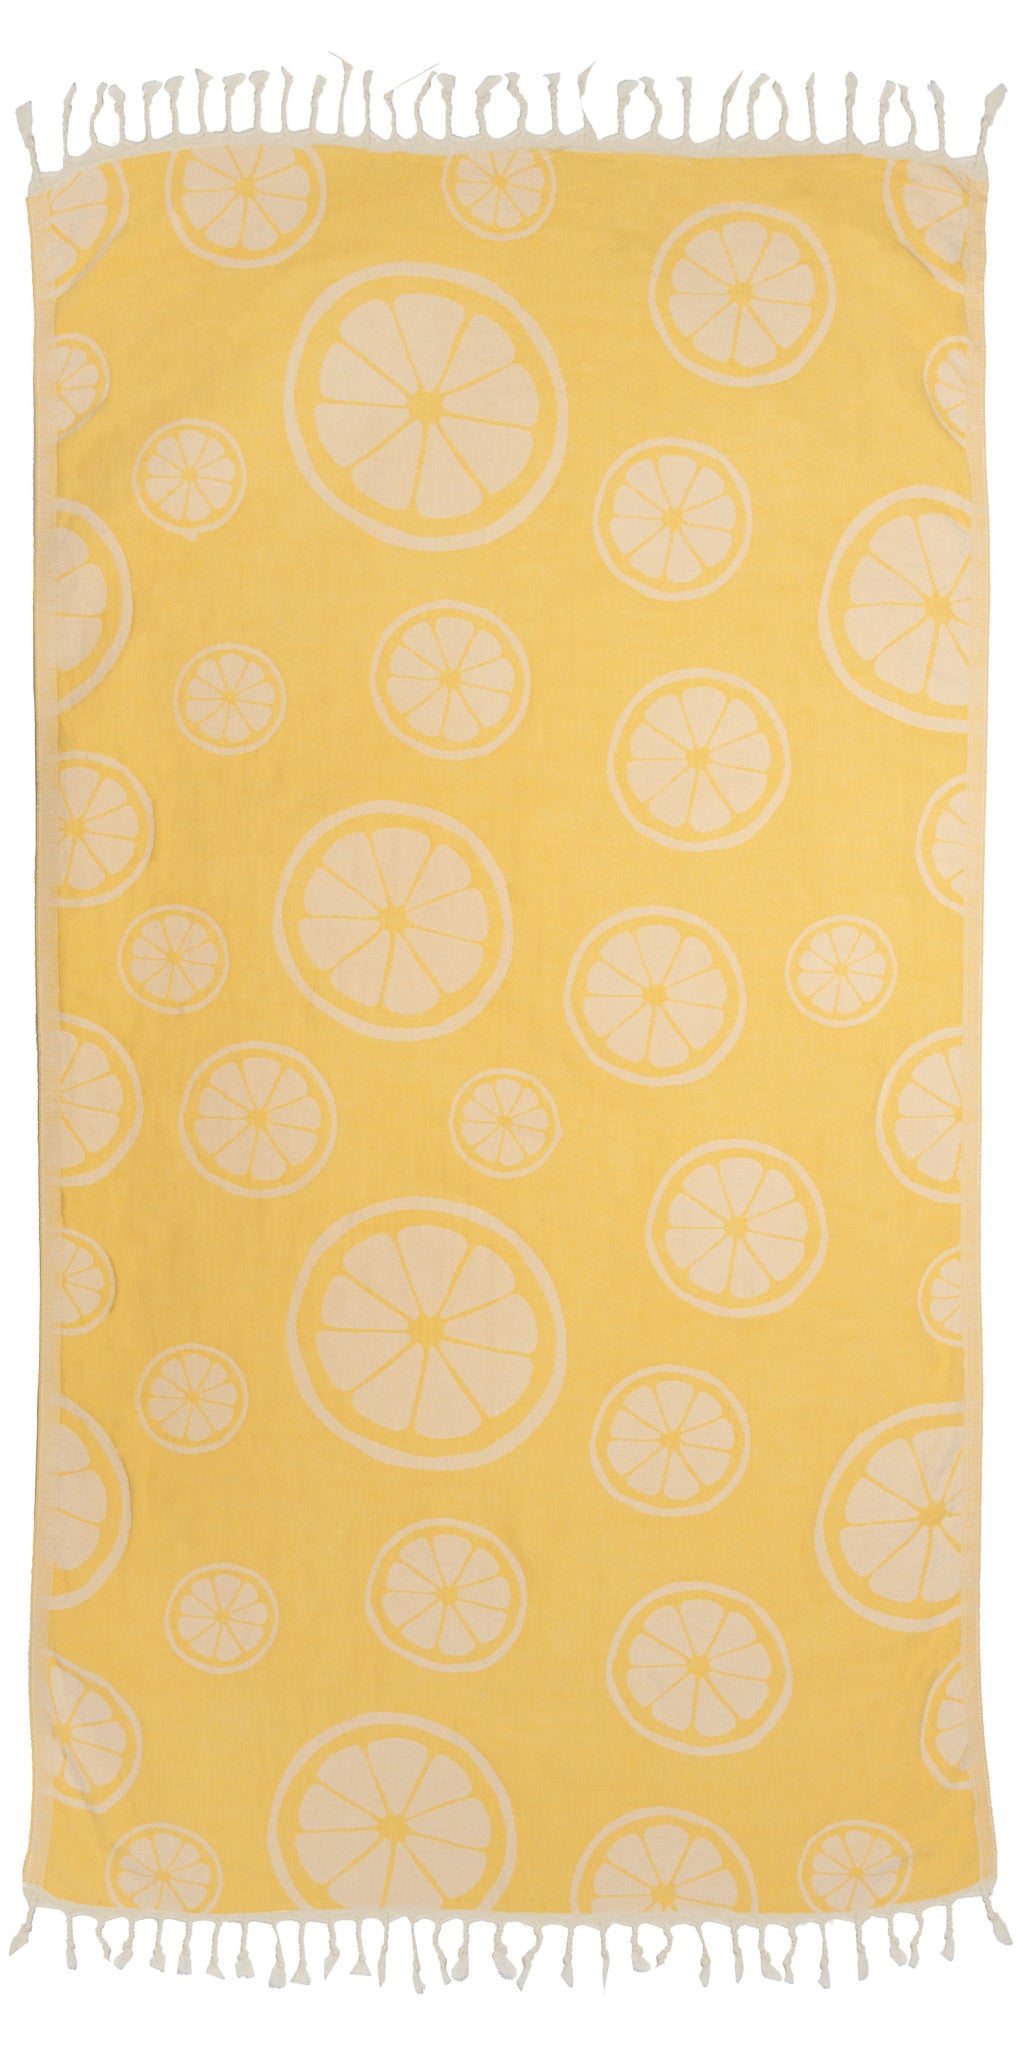 Cotton Terry Bath Towel - Light yellow - Home All